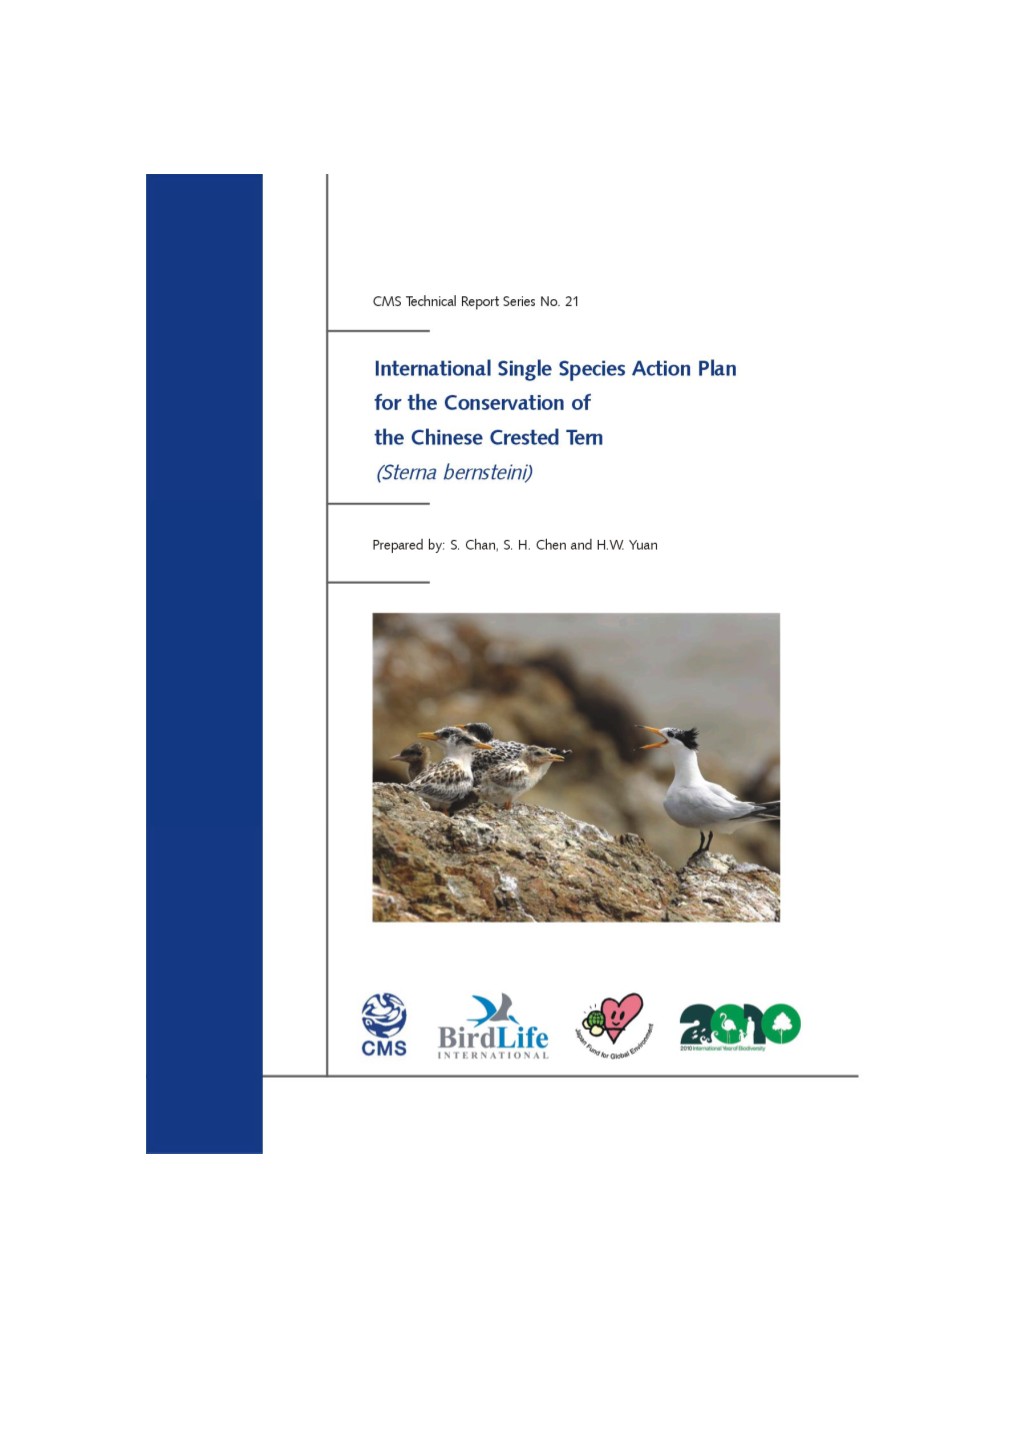 International Single Species Action Plan for the Conservation of the Chinese Crested Tern (Sterna Bernsteini )